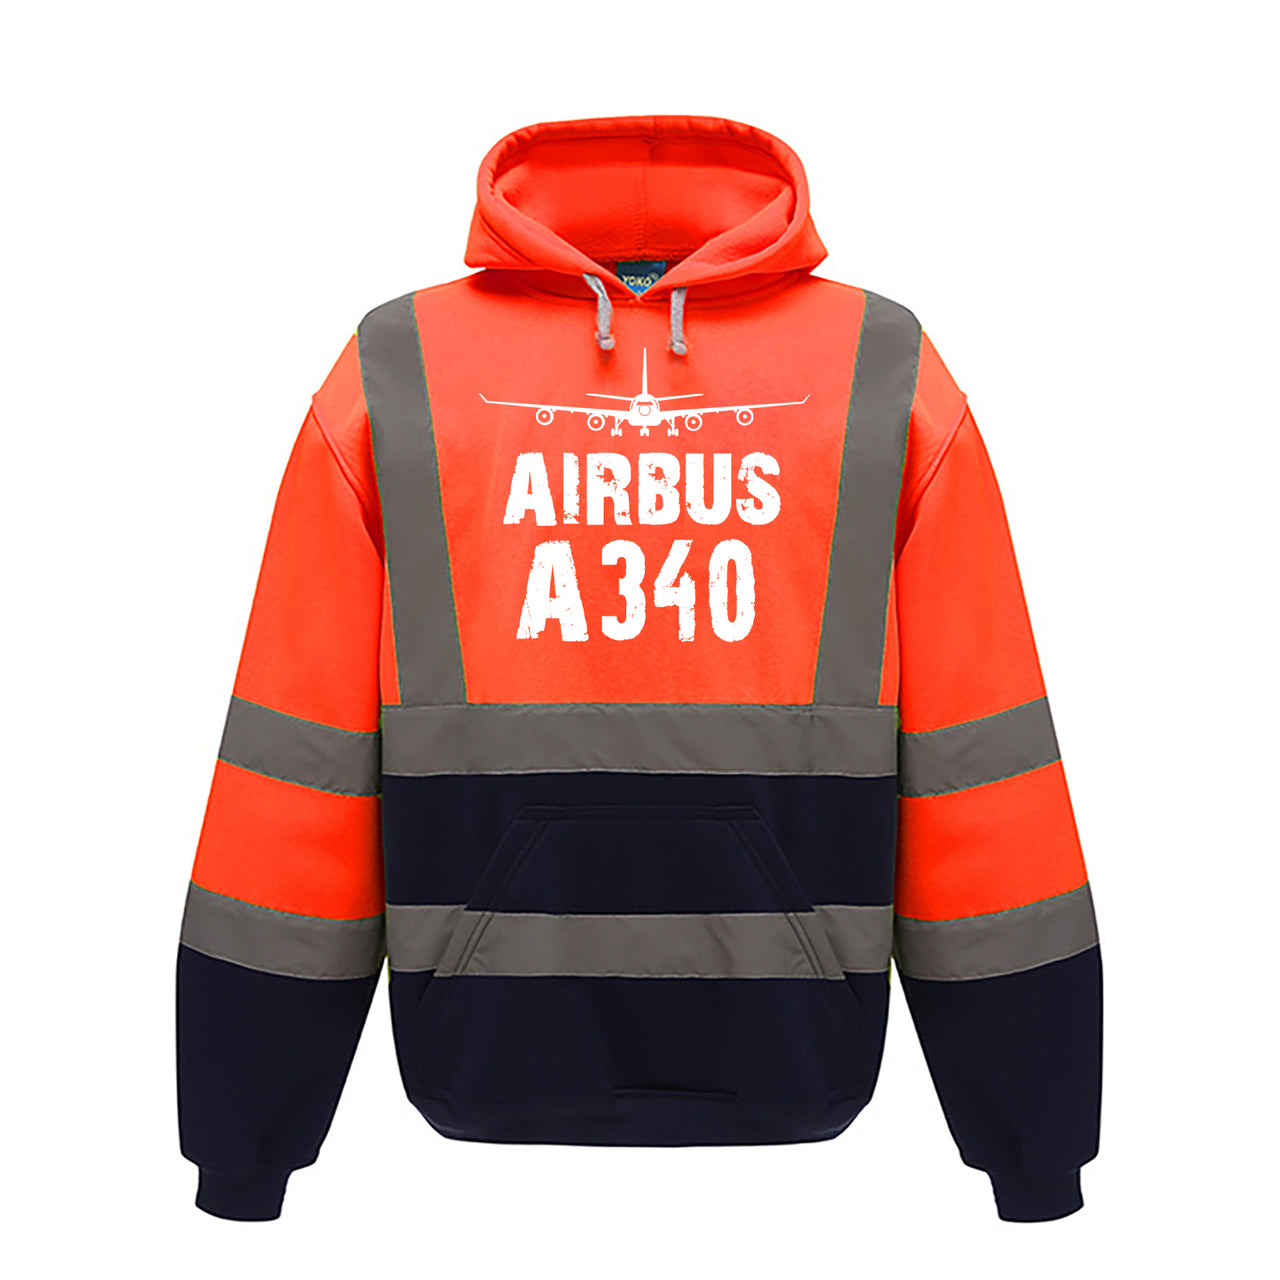 Airbus A340 & Plane Designed Reflective Hoodies